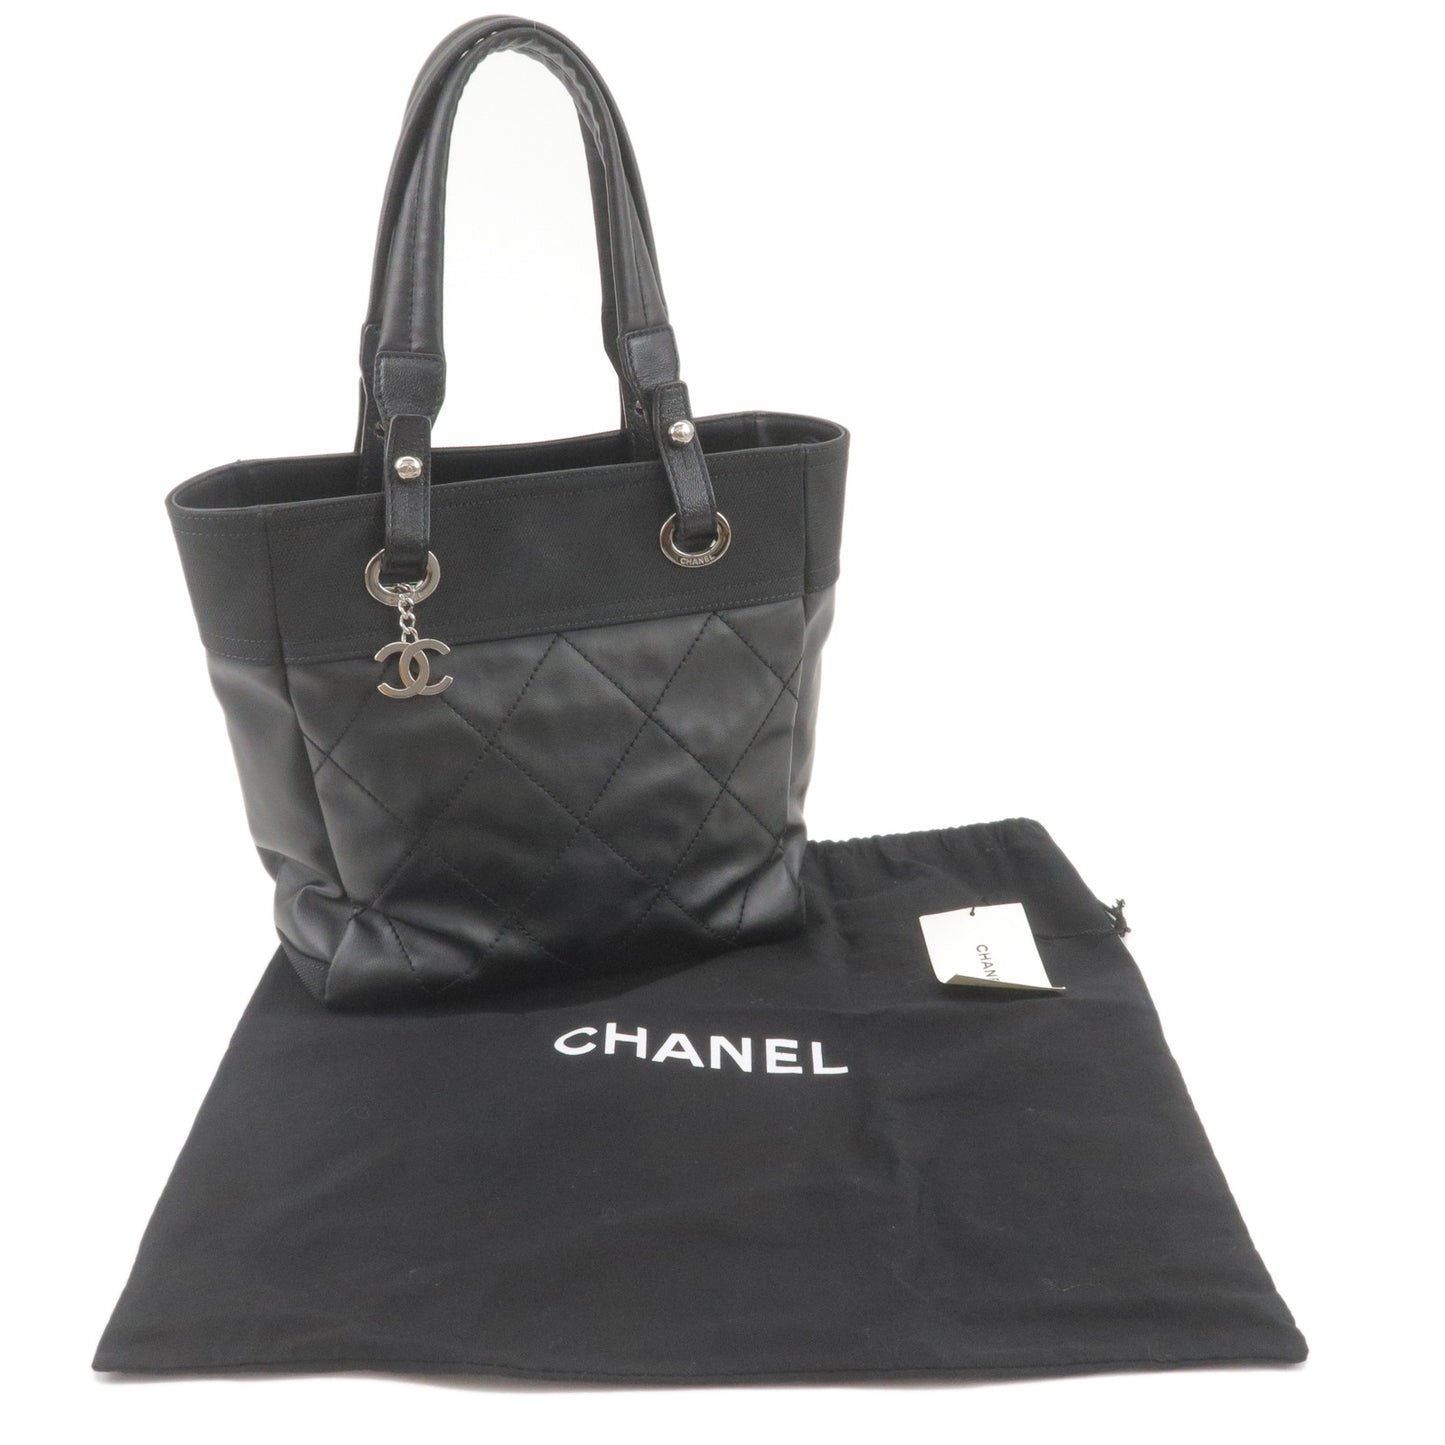 CHANEL Paris Biarritz PM Coated Canvas Leather Tote Bag A34208